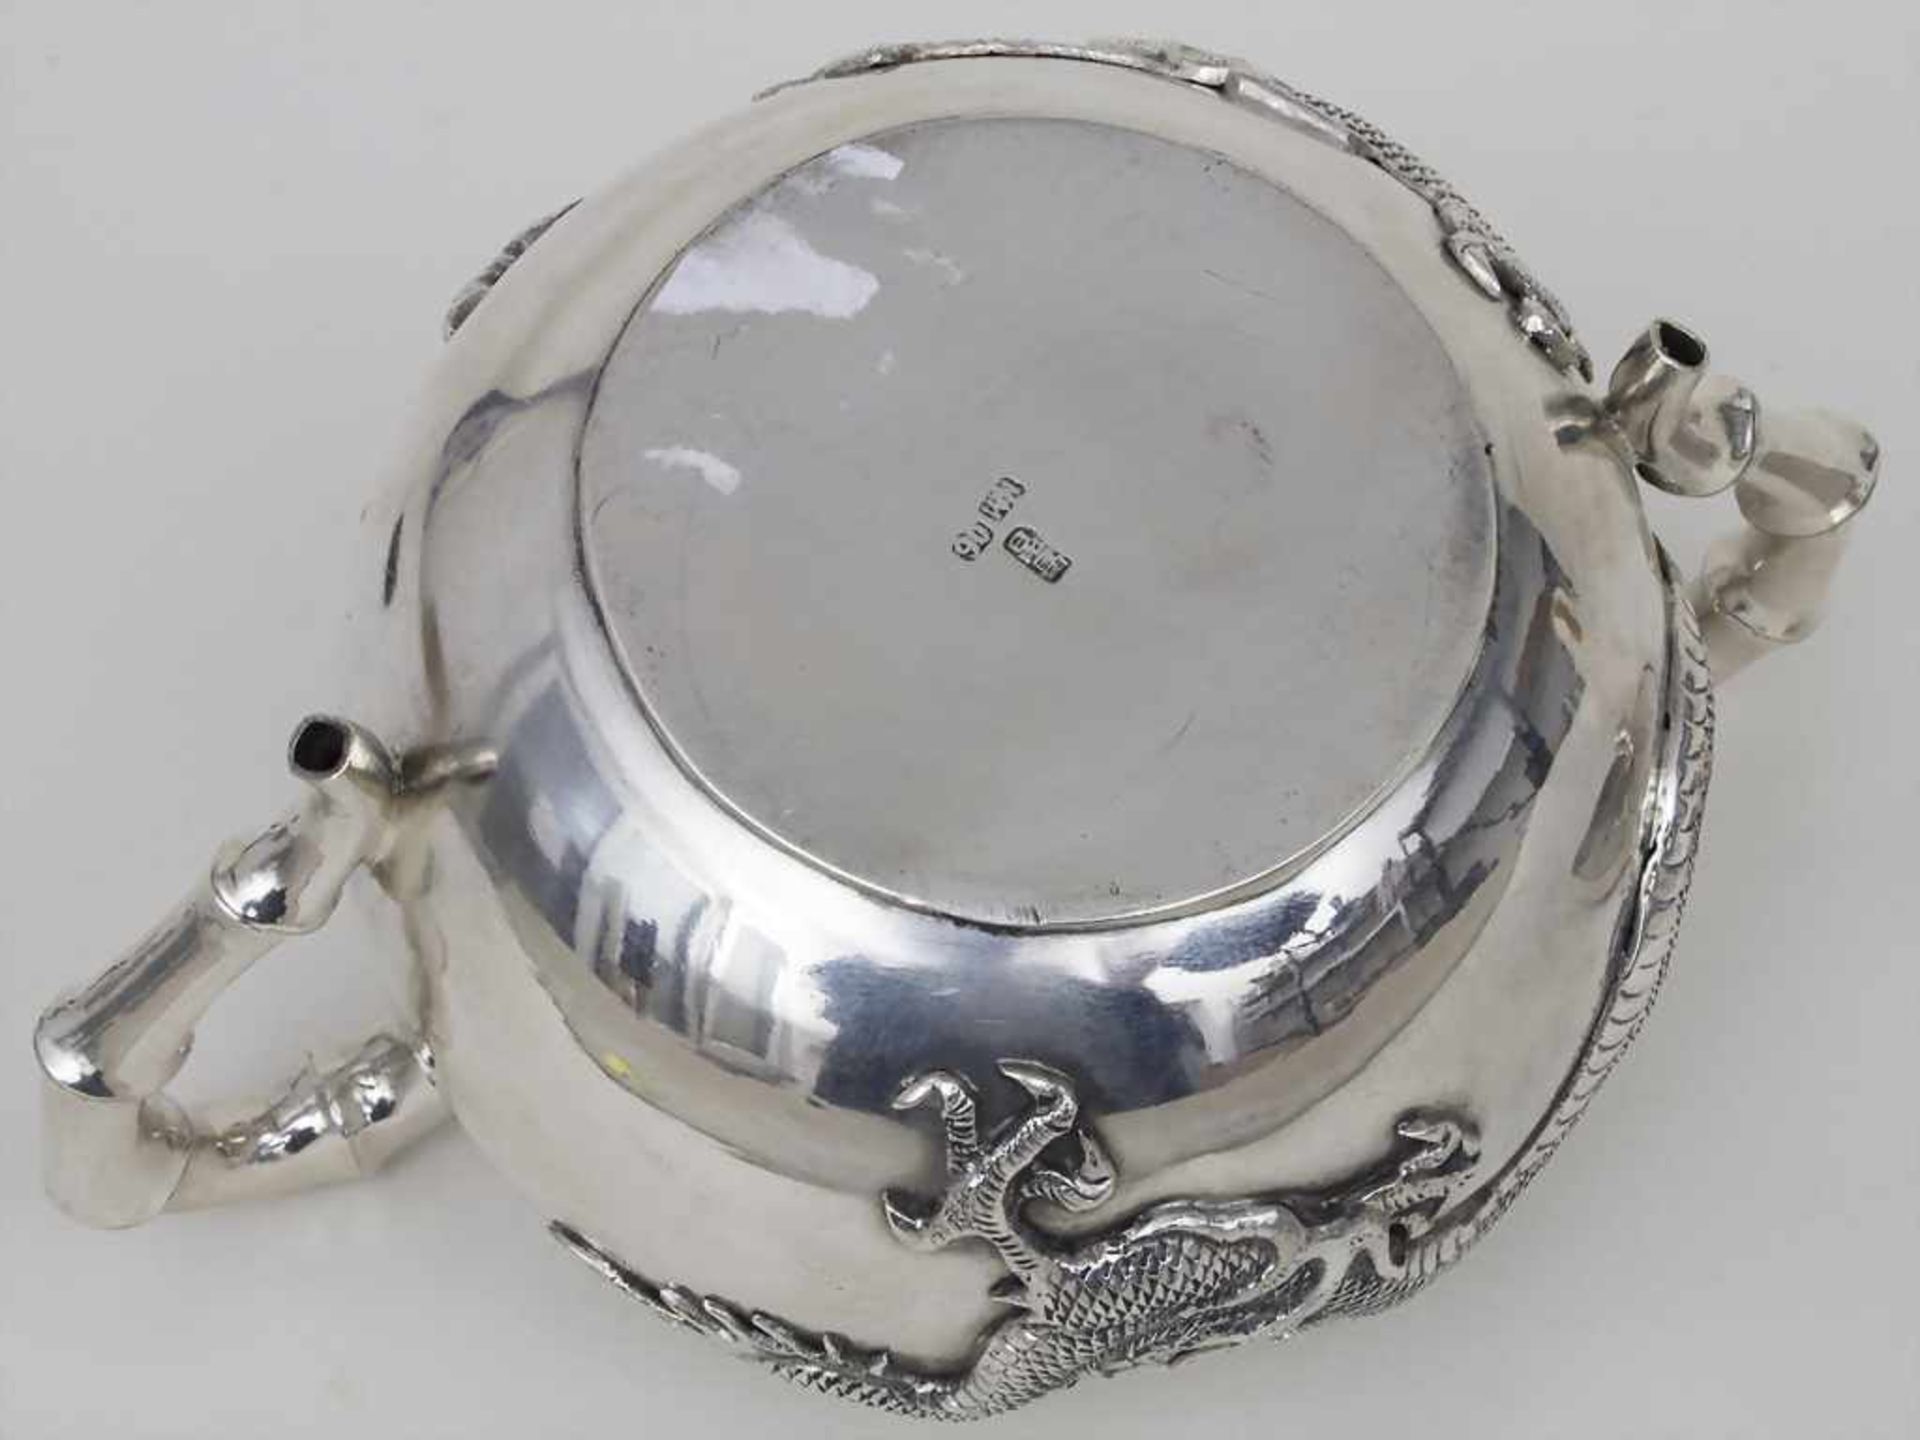 Zuckerdose mit Drachen / A Chinese export silver sugar bowl with a dragon, Wing Nam & Co. (1875- - Image 5 of 6